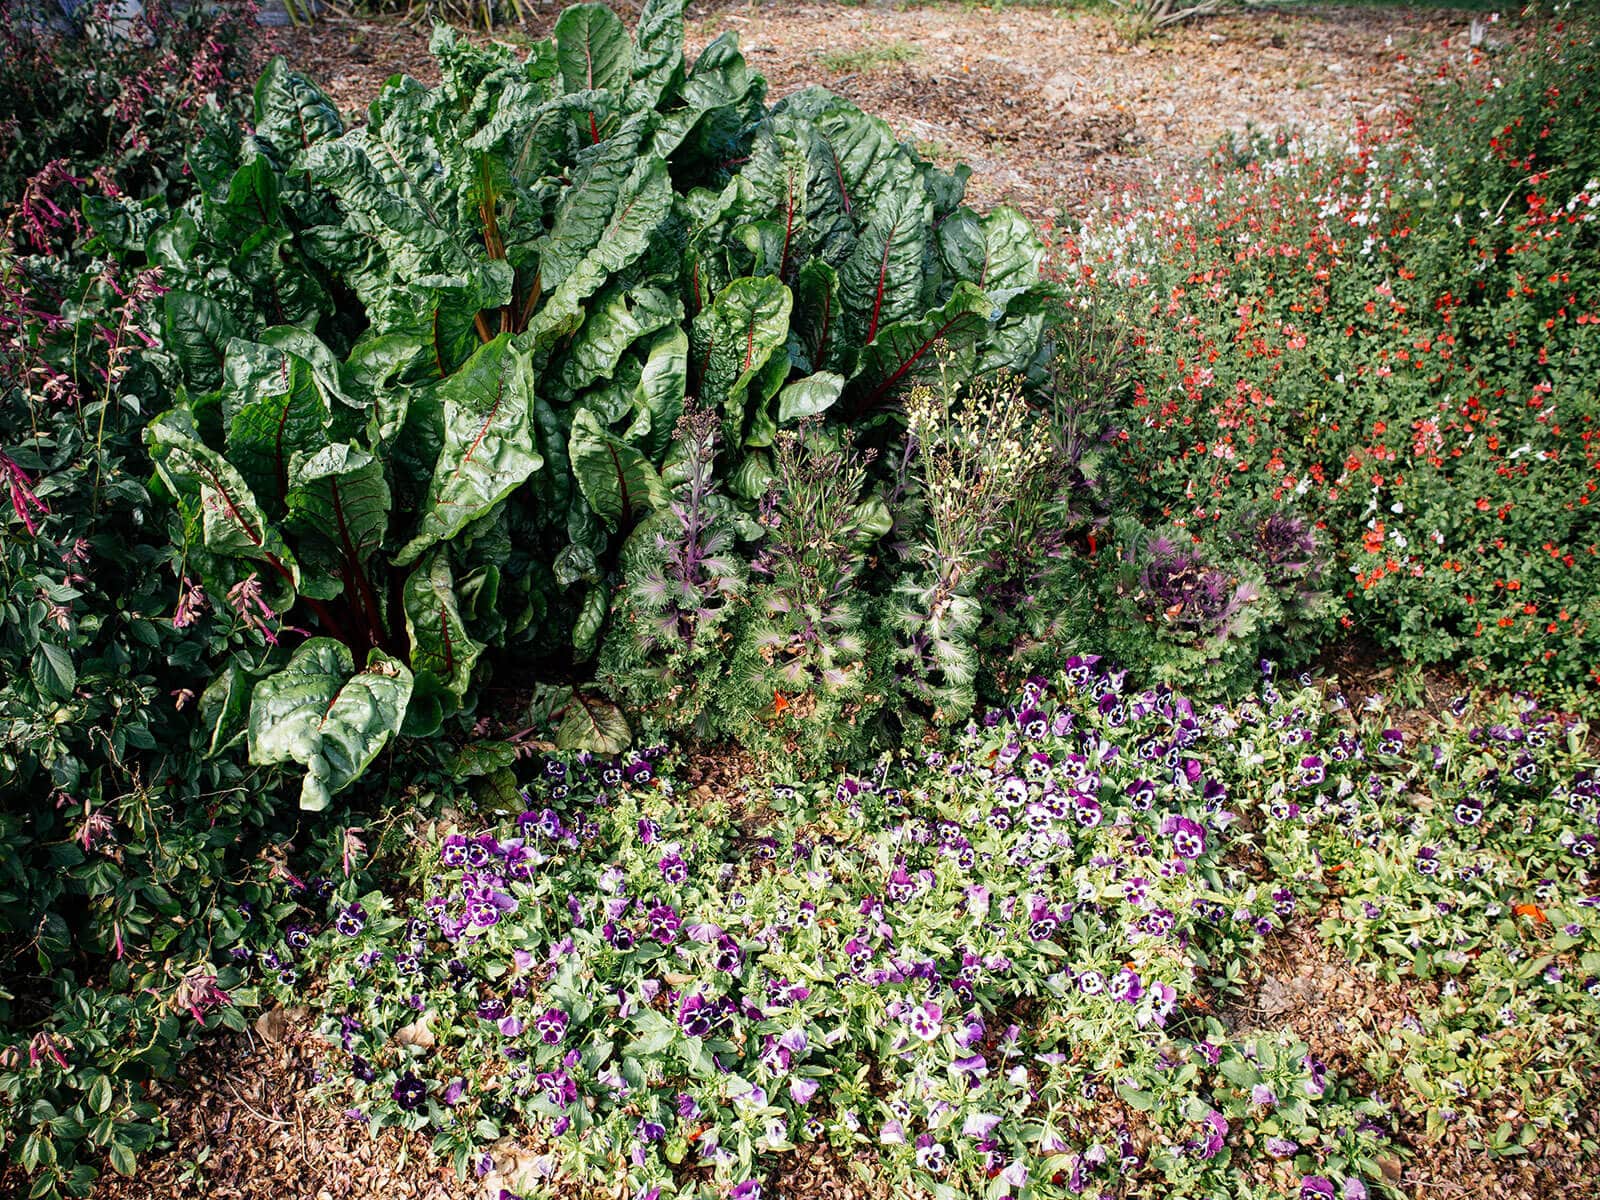 Viola acts as a living mulch for chard and ornamental cabbage